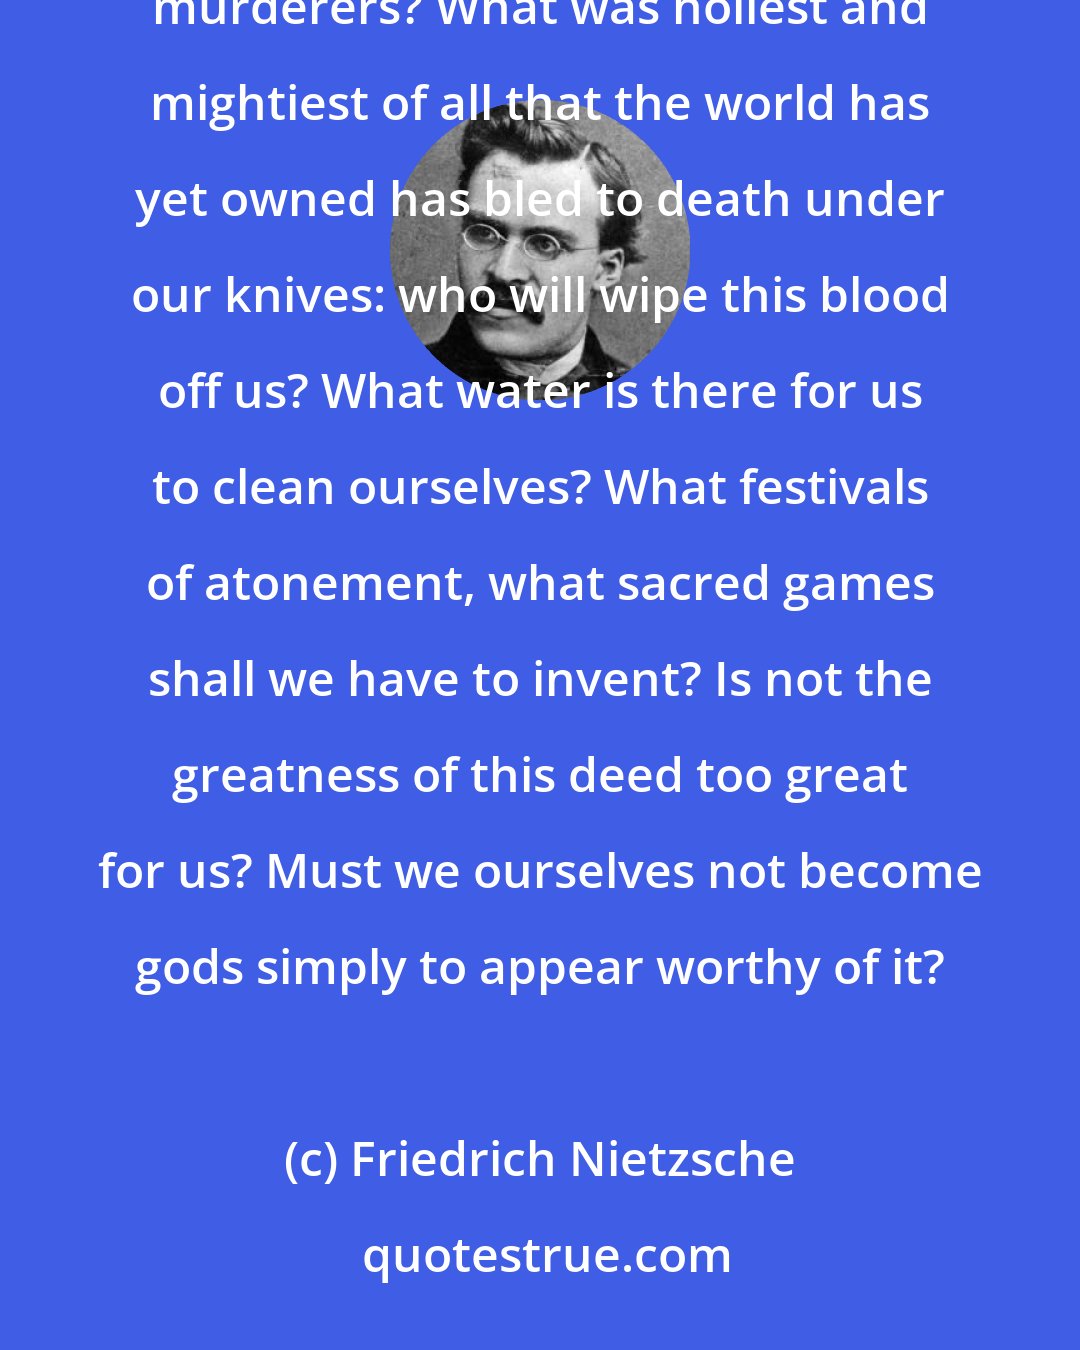 Friedrich Nietzsche: God is dead. God remains dead. And we have killed him. How shall we comfort ourselves, the murderers of all murderers? What was holiest and mightiest of all that the world has yet owned has bled to death under our knives: who will wipe this blood off us? What water is there for us to clean ourselves? What festivals of atonement, what sacred games shall we have to invent? Is not the greatness of this deed too great for us? Must we ourselves not become gods simply to appear worthy of it?